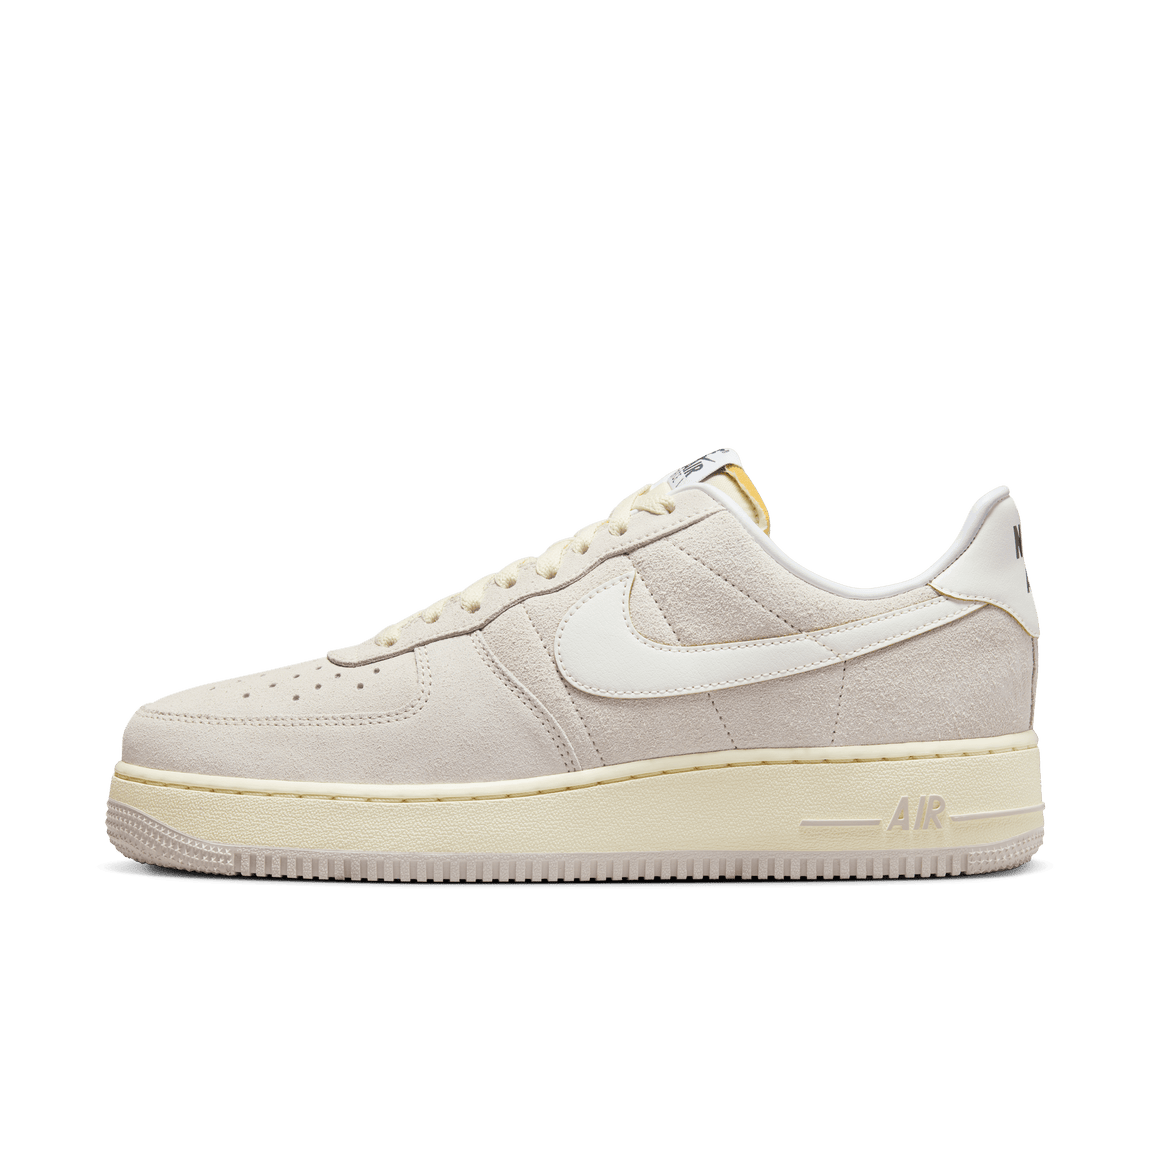 Nike Air Force 1 Low “Athletic Department” (Light Orewood Brown/Sail) - Nike Air Force 1 Low “Athletic Department” (Light Orewood Brown/Sail) - 